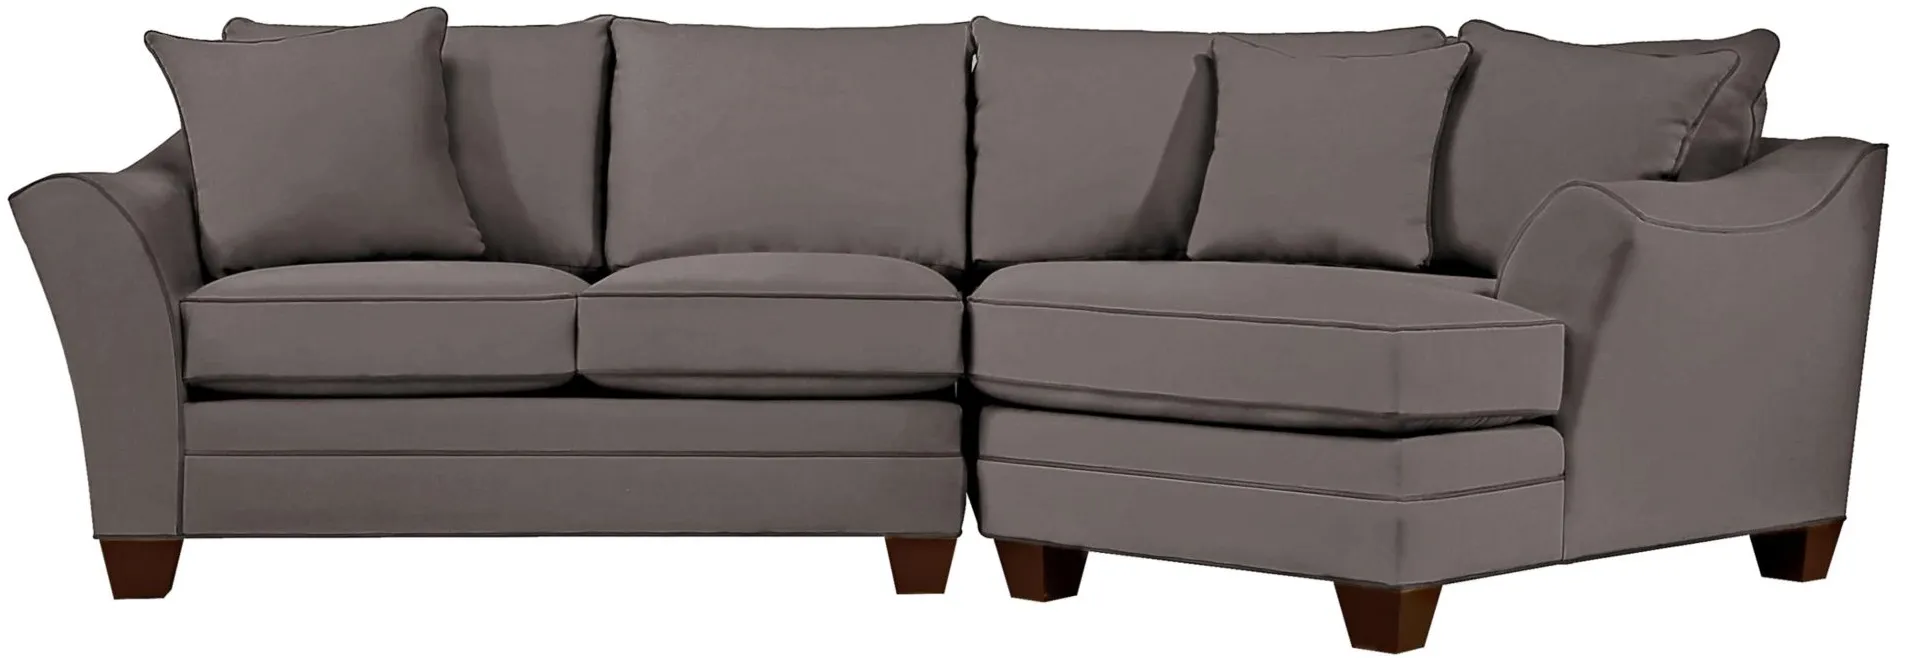 Foresthill 2-pc. Right Hand Cuddler Sectional Sofa in Suede So Soft Slate by H.M. Richards